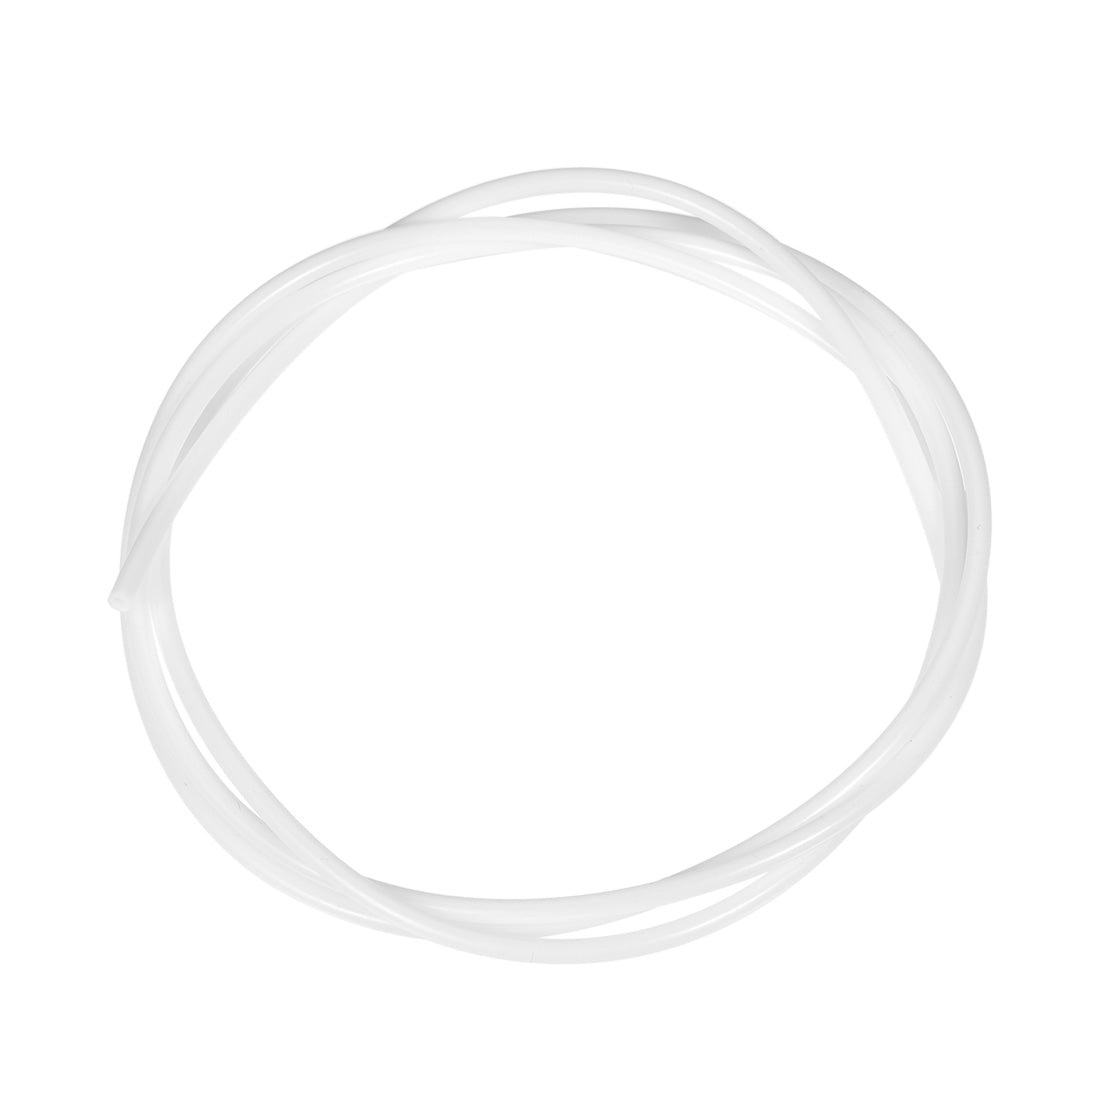 uxcell Uxcell PTFE Tube 4.9Ft - ID 2mm x OD 3mm Fit 1.75 Filament for 3D Printer White